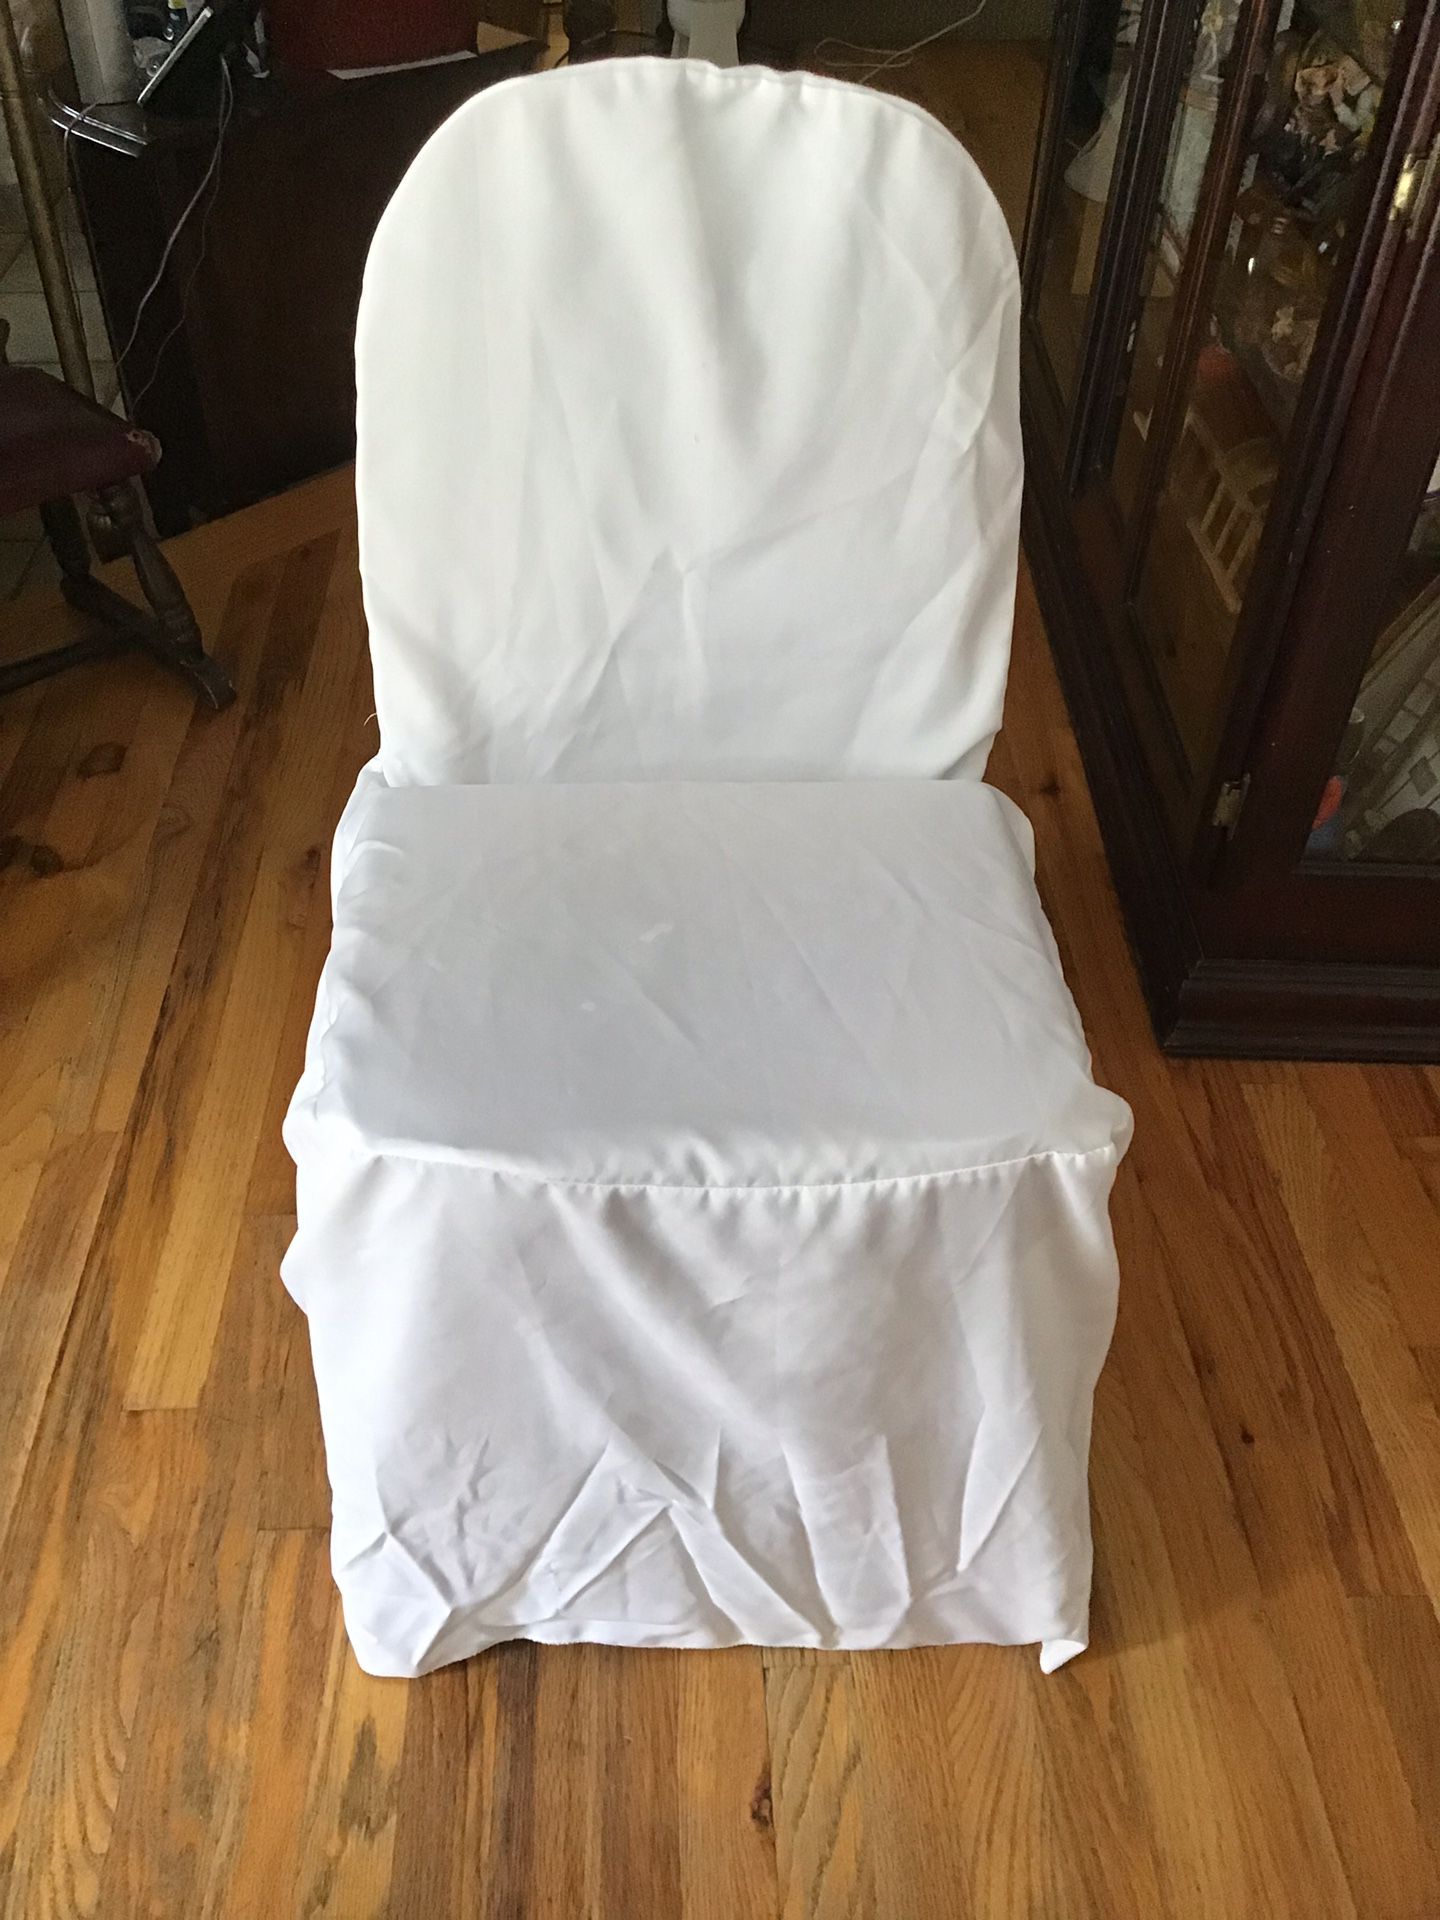 Banquet chair covers white